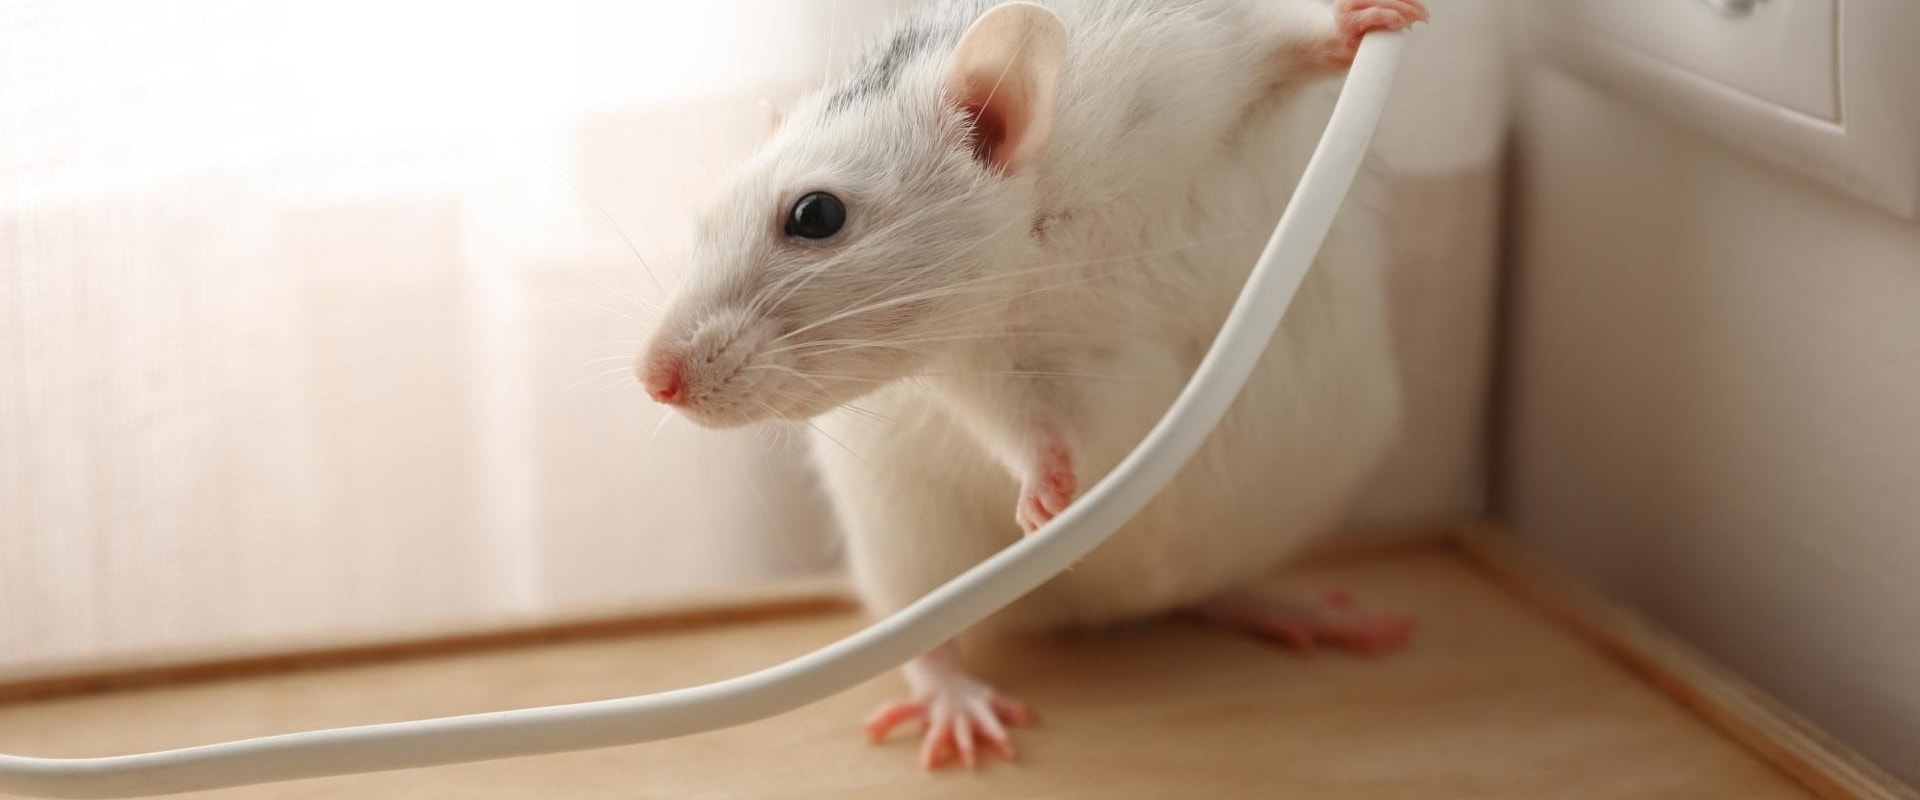 Do electronic rodent repellers really work?